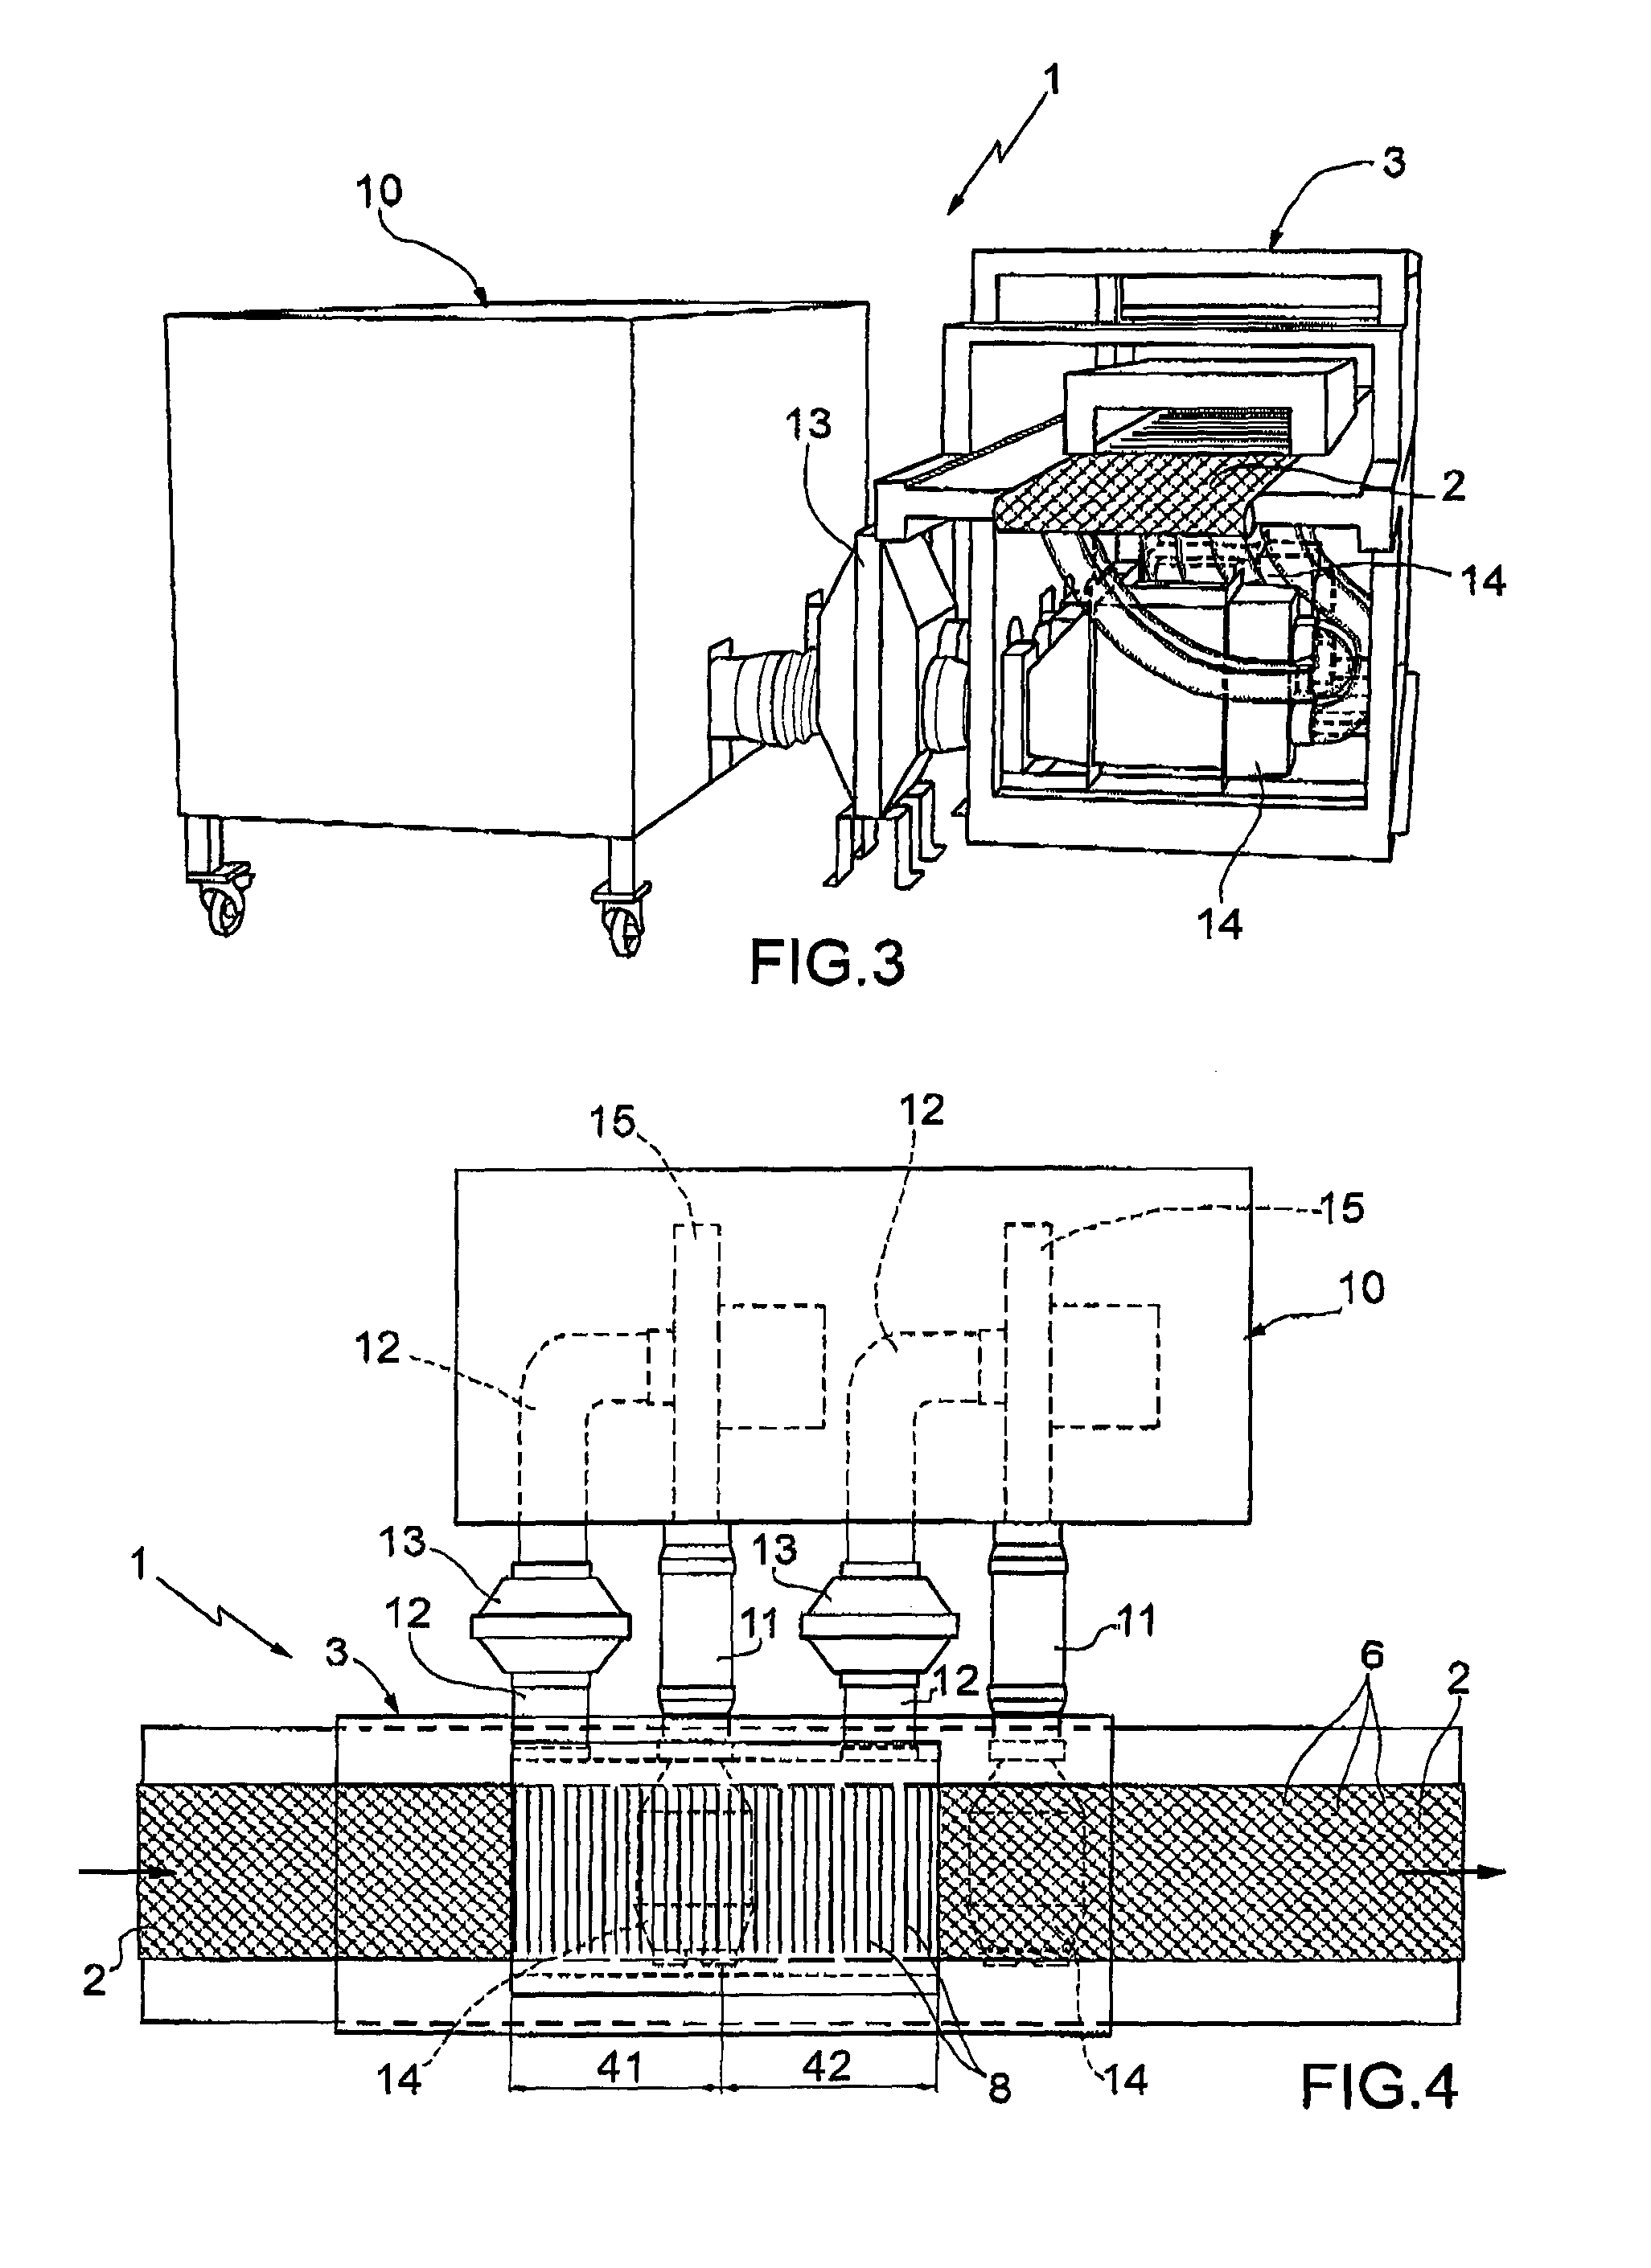 Apparatus and Method for Drying and/or Treating Loose Food Products